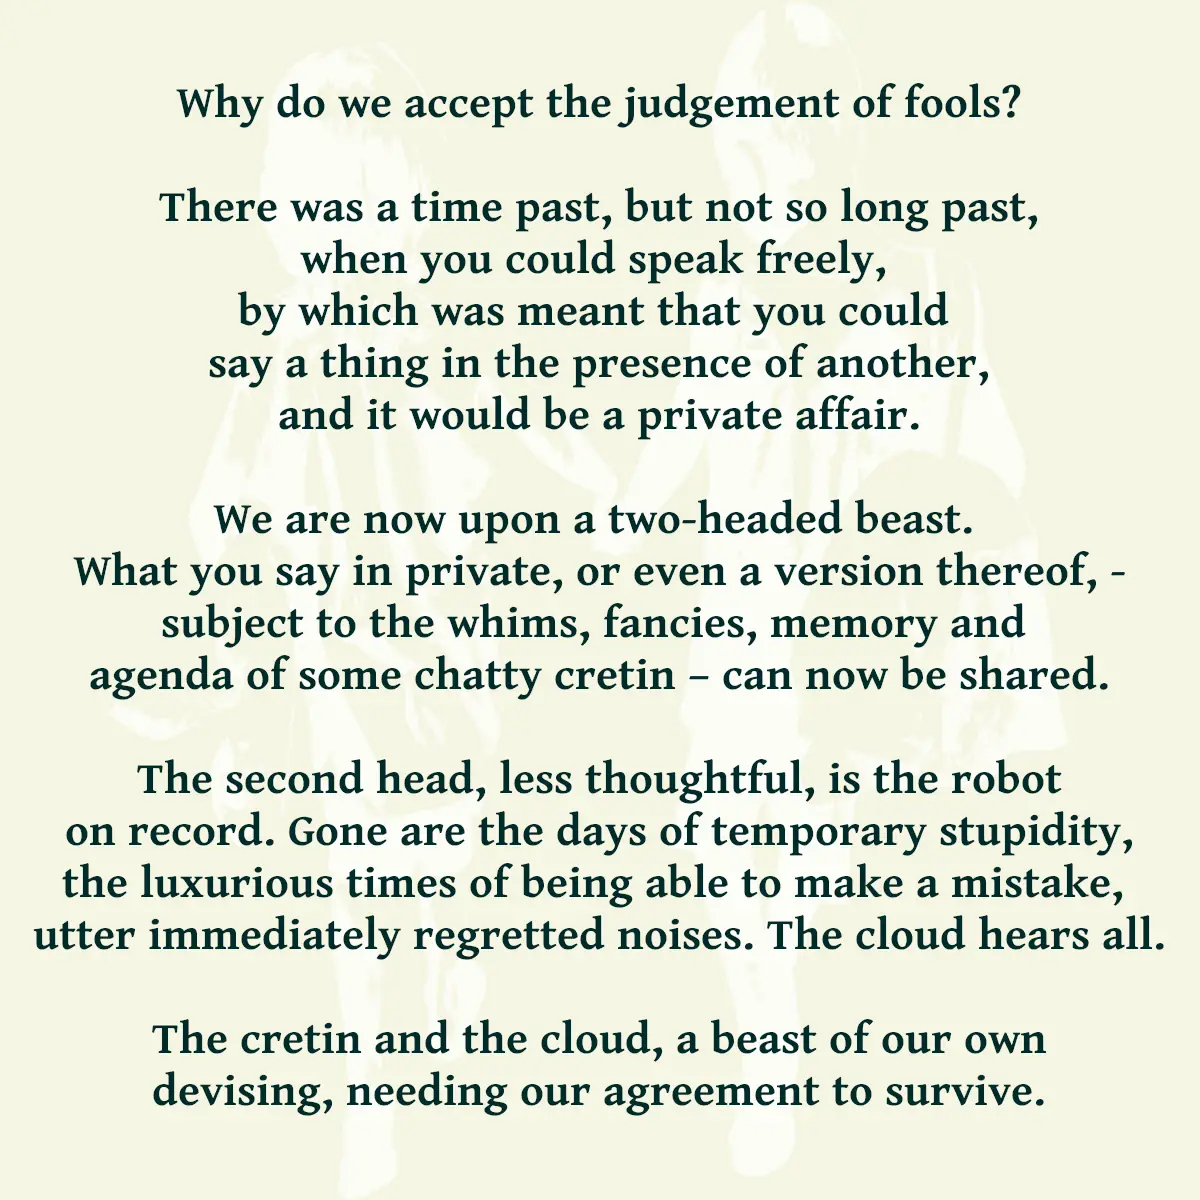 Why do we accept the judgement of fools? There was a time past, but not so long past, when you could speak freely, by which was meant that you could say a thing in the presence of another, and it would be a private affair. We are now upon a two-headed beast, what you say in private, or even a version thereof, - subject to the whims, fancies, memory and agenda of some chatty cretin – can now be shared. The second head, less thoughtful, is the robot on record. Gone are the days of temporary stupidity, the luxurious times of being able to make a mistake, utter immediately regretted noises. The cloud hears all. The cretin and the cloud, a beast of our own devising, needing our agreement to survive.